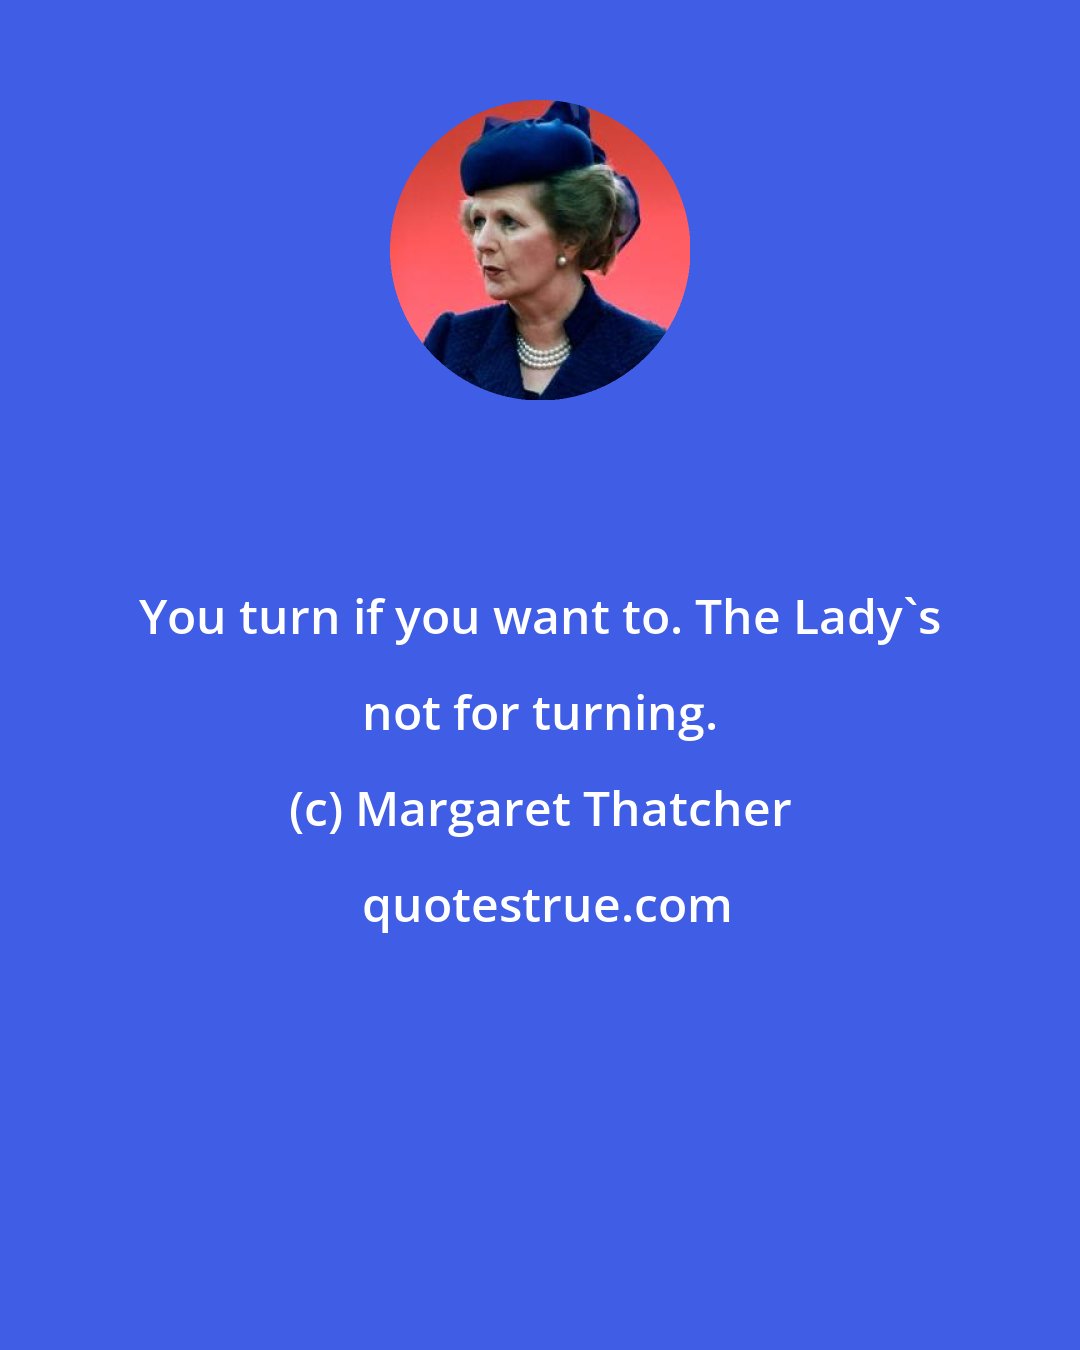 Margaret Thatcher: You turn if you want to. The Lady's not for turning.